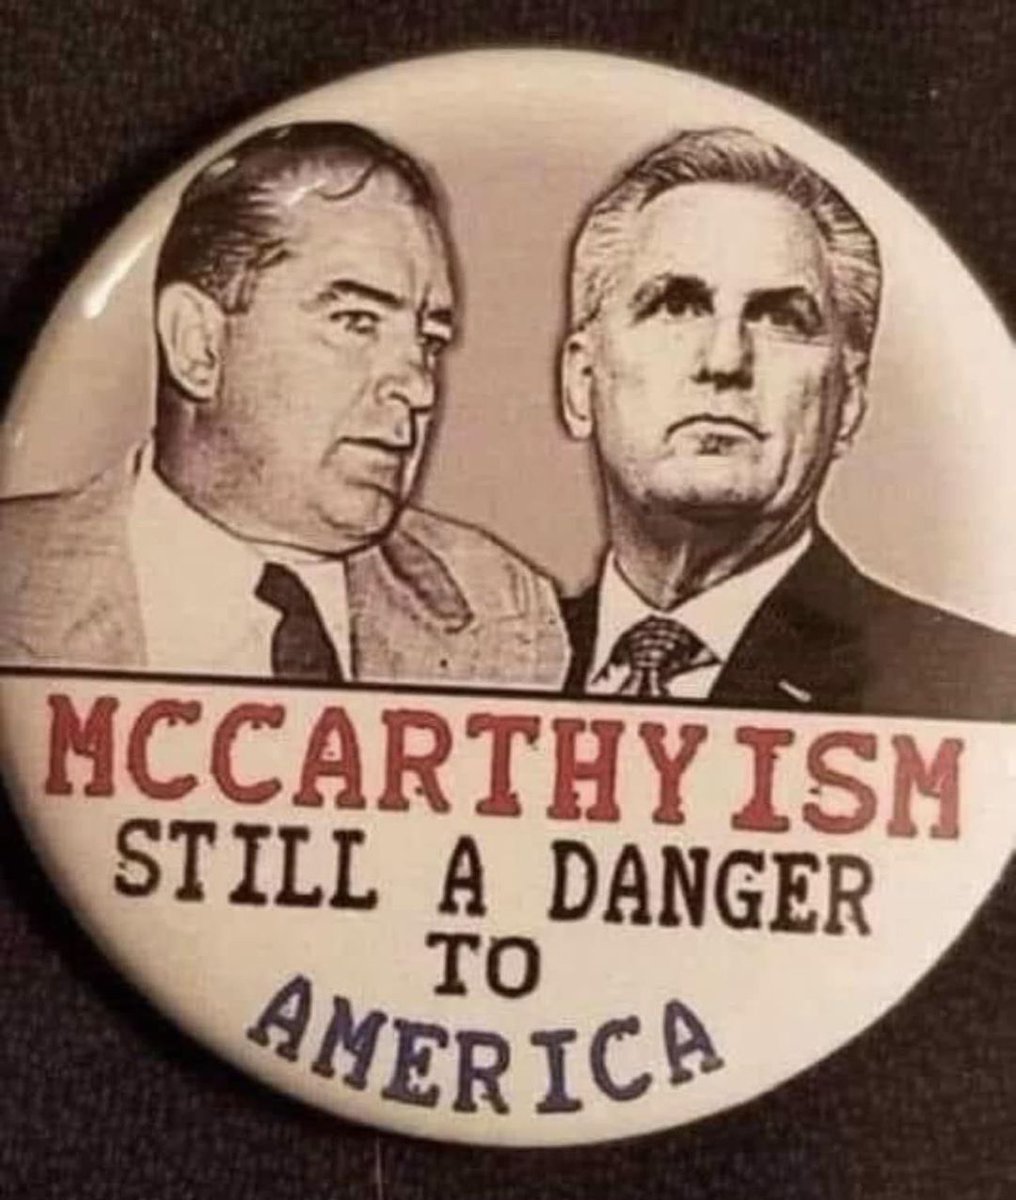 @nathaliejacoby1 McCarthyism.............
#GOPDead of pure hatred.